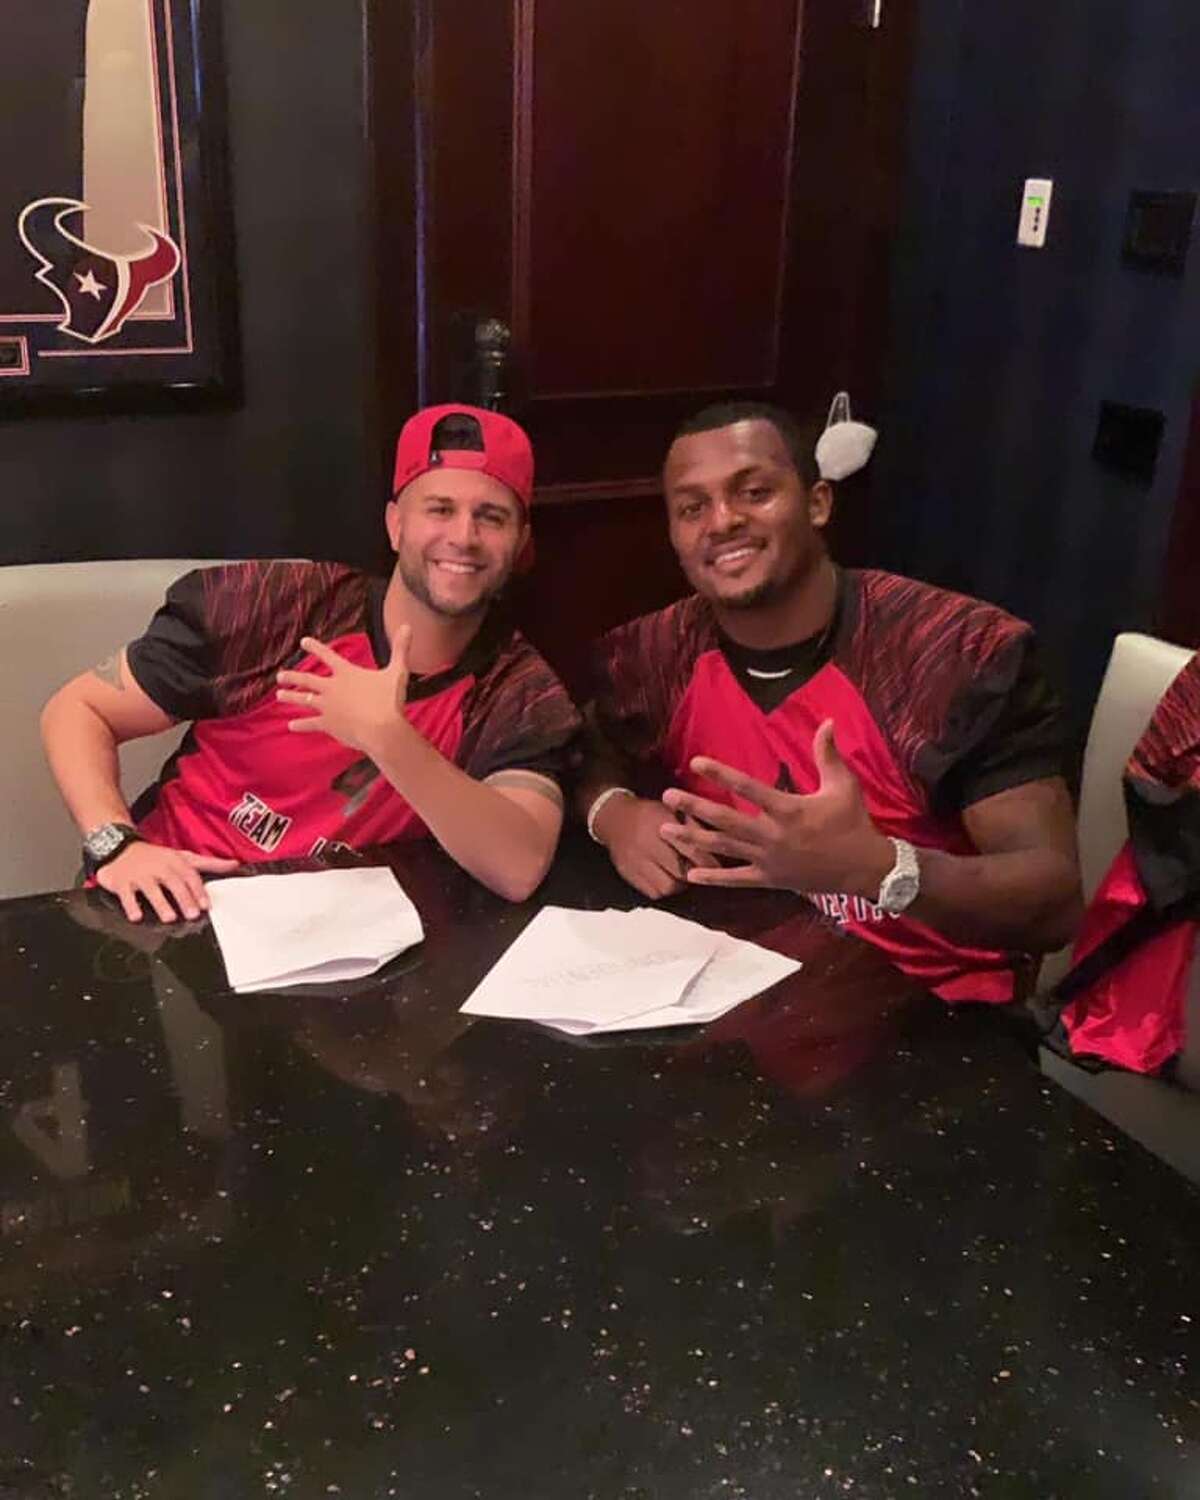 Lefty's Famous Cheesesteakes Hoagies & Grill has now partnered with Deshaun Watson.